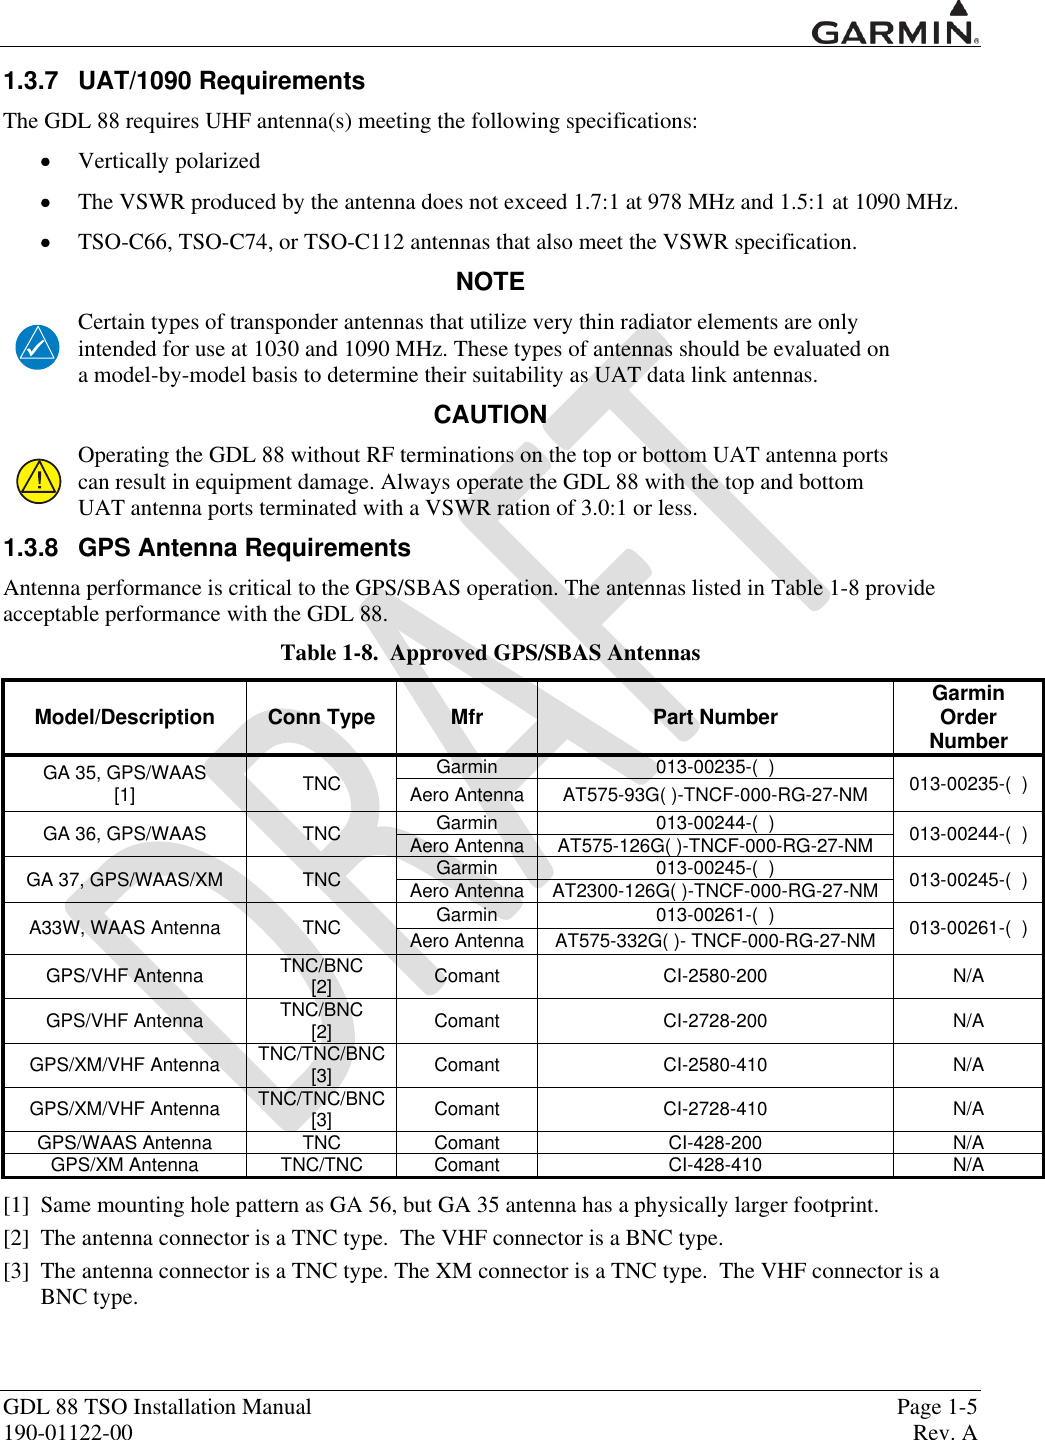  GDL 88 TSO Installation Manual    Page 1-5 190-01122-00  Rev. A  1.3.7  UAT/1090 Requirements The GDL 88 requires UHF antenna(s) meeting the following specifications:  Vertically polarized  The VSWR produced by the antenna does not exceed 1.7:1 at 978 MHz and 1.5:1 at 1090 MHz.  TSO-C66, TSO-C74, or TSO-C112 antennas that also meet the VSWR specification. NOTE Certain types of transponder antennas that utilize very thin radiator elements are only intended for use at 1030 and 1090 MHz. These types of antennas should be evaluated on a model-by-model basis to determine their suitability as UAT data link antennas. CAUTION Operating the GDL 88 without RF terminations on the top or bottom UAT antenna ports can result in equipment damage. Always operate the GDL 88 with the top and bottom UAT antenna ports terminated with a VSWR ration of 3.0:1 or less. 1.3.8  GPS Antenna Requirements Antenna performance is critical to the GPS/SBAS operation. The antennas listed in Table 1-8 provide acceptable performance with the GDL 88. Table 1-8.  Approved GPS/SBAS Antennas Model/Description Conn Type Mfr Part Number Garmin Order Number GA 35, GPS/WAAS  [1] TNC Garmin 013-00235-(  ) 013-00235-(  ) Aero Antenna AT575-93G( )-TNCF-000-RG-27-NM GA 36, GPS/WAAS TNC Garmin 013-00244-(  ) 013-00244-(  ) Aero Antenna AT575-126G( )-TNCF-000-RG-27-NM GA 37, GPS/WAAS/XM TNC Garmin 013-00245-(  ) 013-00245-(  ) Aero Antenna AT2300-126G( )-TNCF-000-RG-27-NM A33W, WAAS Antenna  TNC Garmin 013-00261-(  ) 013-00261-(  ) Aero Antenna AT575-332G( )- TNCF-000-RG-27-NM GPS/VHF Antenna TNC/BNC  [2] Comant CI-2580-200 N/A GPS/VHF Antenna TNC/BNC  [2] Comant CI-2728-200 N/A GPS/XM/VHF Antenna TNC/TNC/BNC [3] Comant CI-2580-410 N/A GPS/XM/VHF Antenna TNC/TNC/BNC [3] Comant CI-2728-410 N/A GPS/WAAS Antenna TNC Comant CI-428-200 N/A GPS/XM Antenna TNC/TNC Comant CI-428-410 N/A [1]  Same mounting hole pattern as GA 56, but GA 35 antenna has a physically larger footprint. [2]  The antenna connector is a TNC type.  The VHF connector is a BNC type.  [3]  The antenna connector is a TNC type. The XM connector is a TNC type.  The VHF connector is a BNC type.  